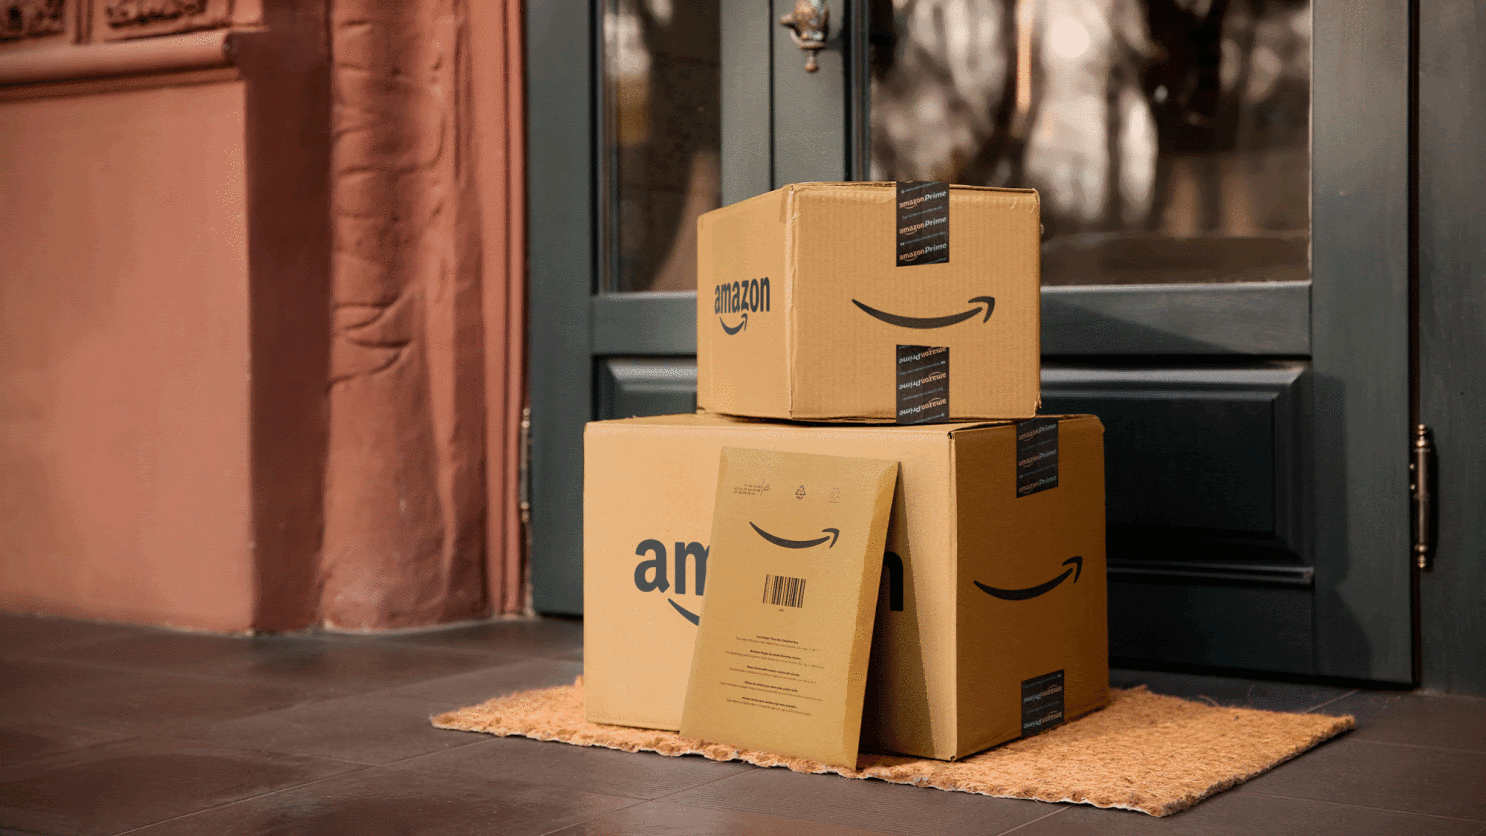 How Amazon uses data analytics to improve package tracking